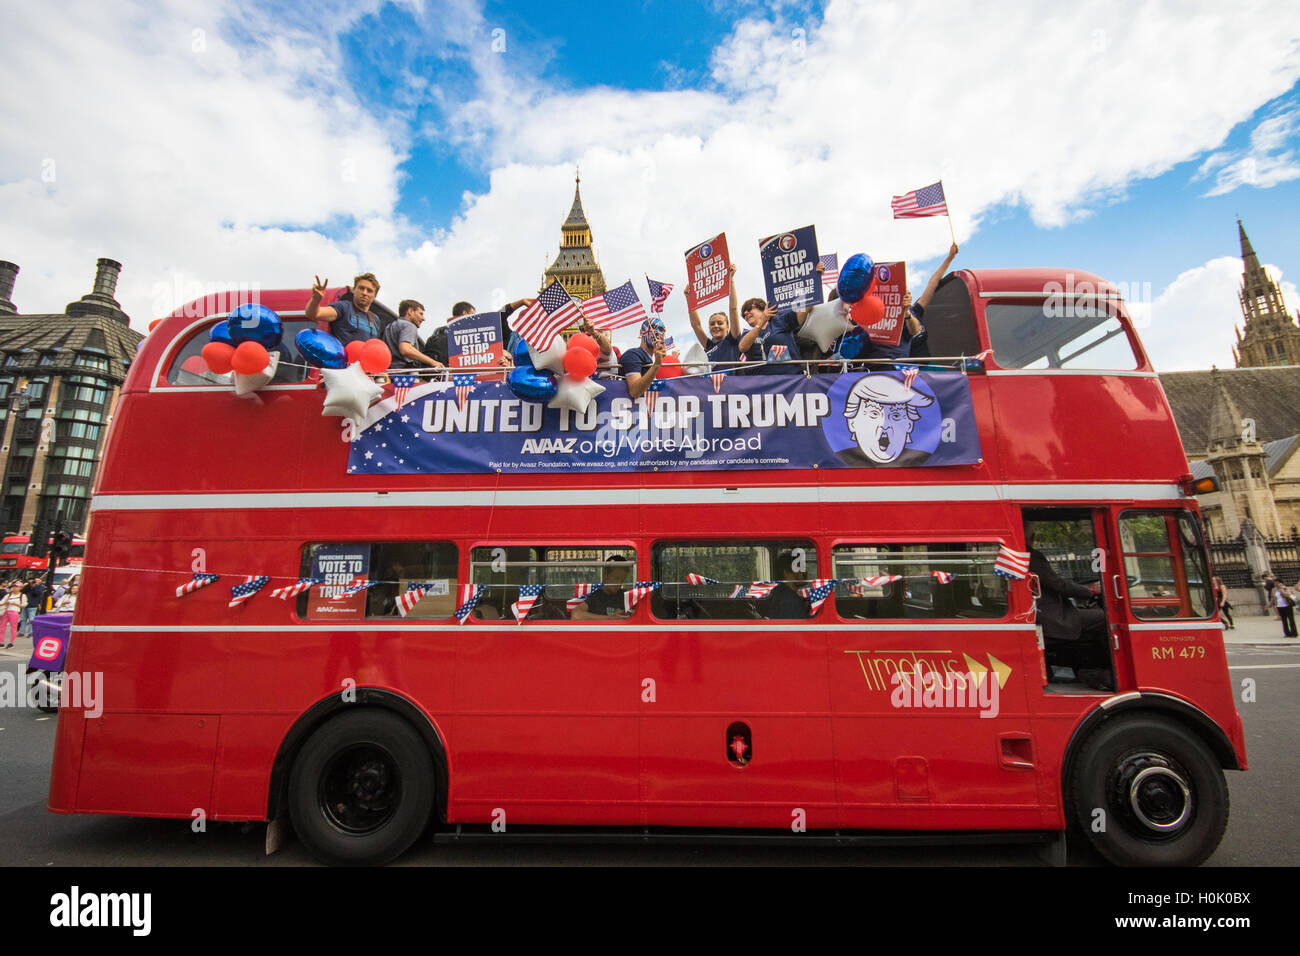 London, UK. 21st Sep, 2016. London, September 21st 2016. A "Stop Trump" open topped red London double-decker bus passes the Houses of Parliament and Big Ben in London in a bid to encourage US expats to register to vote in the Presidential election, expecting the majority of them to be more inclined to support Hilary Clinton. Credit:  Paul Davey/Alamy Live News Stock Photo